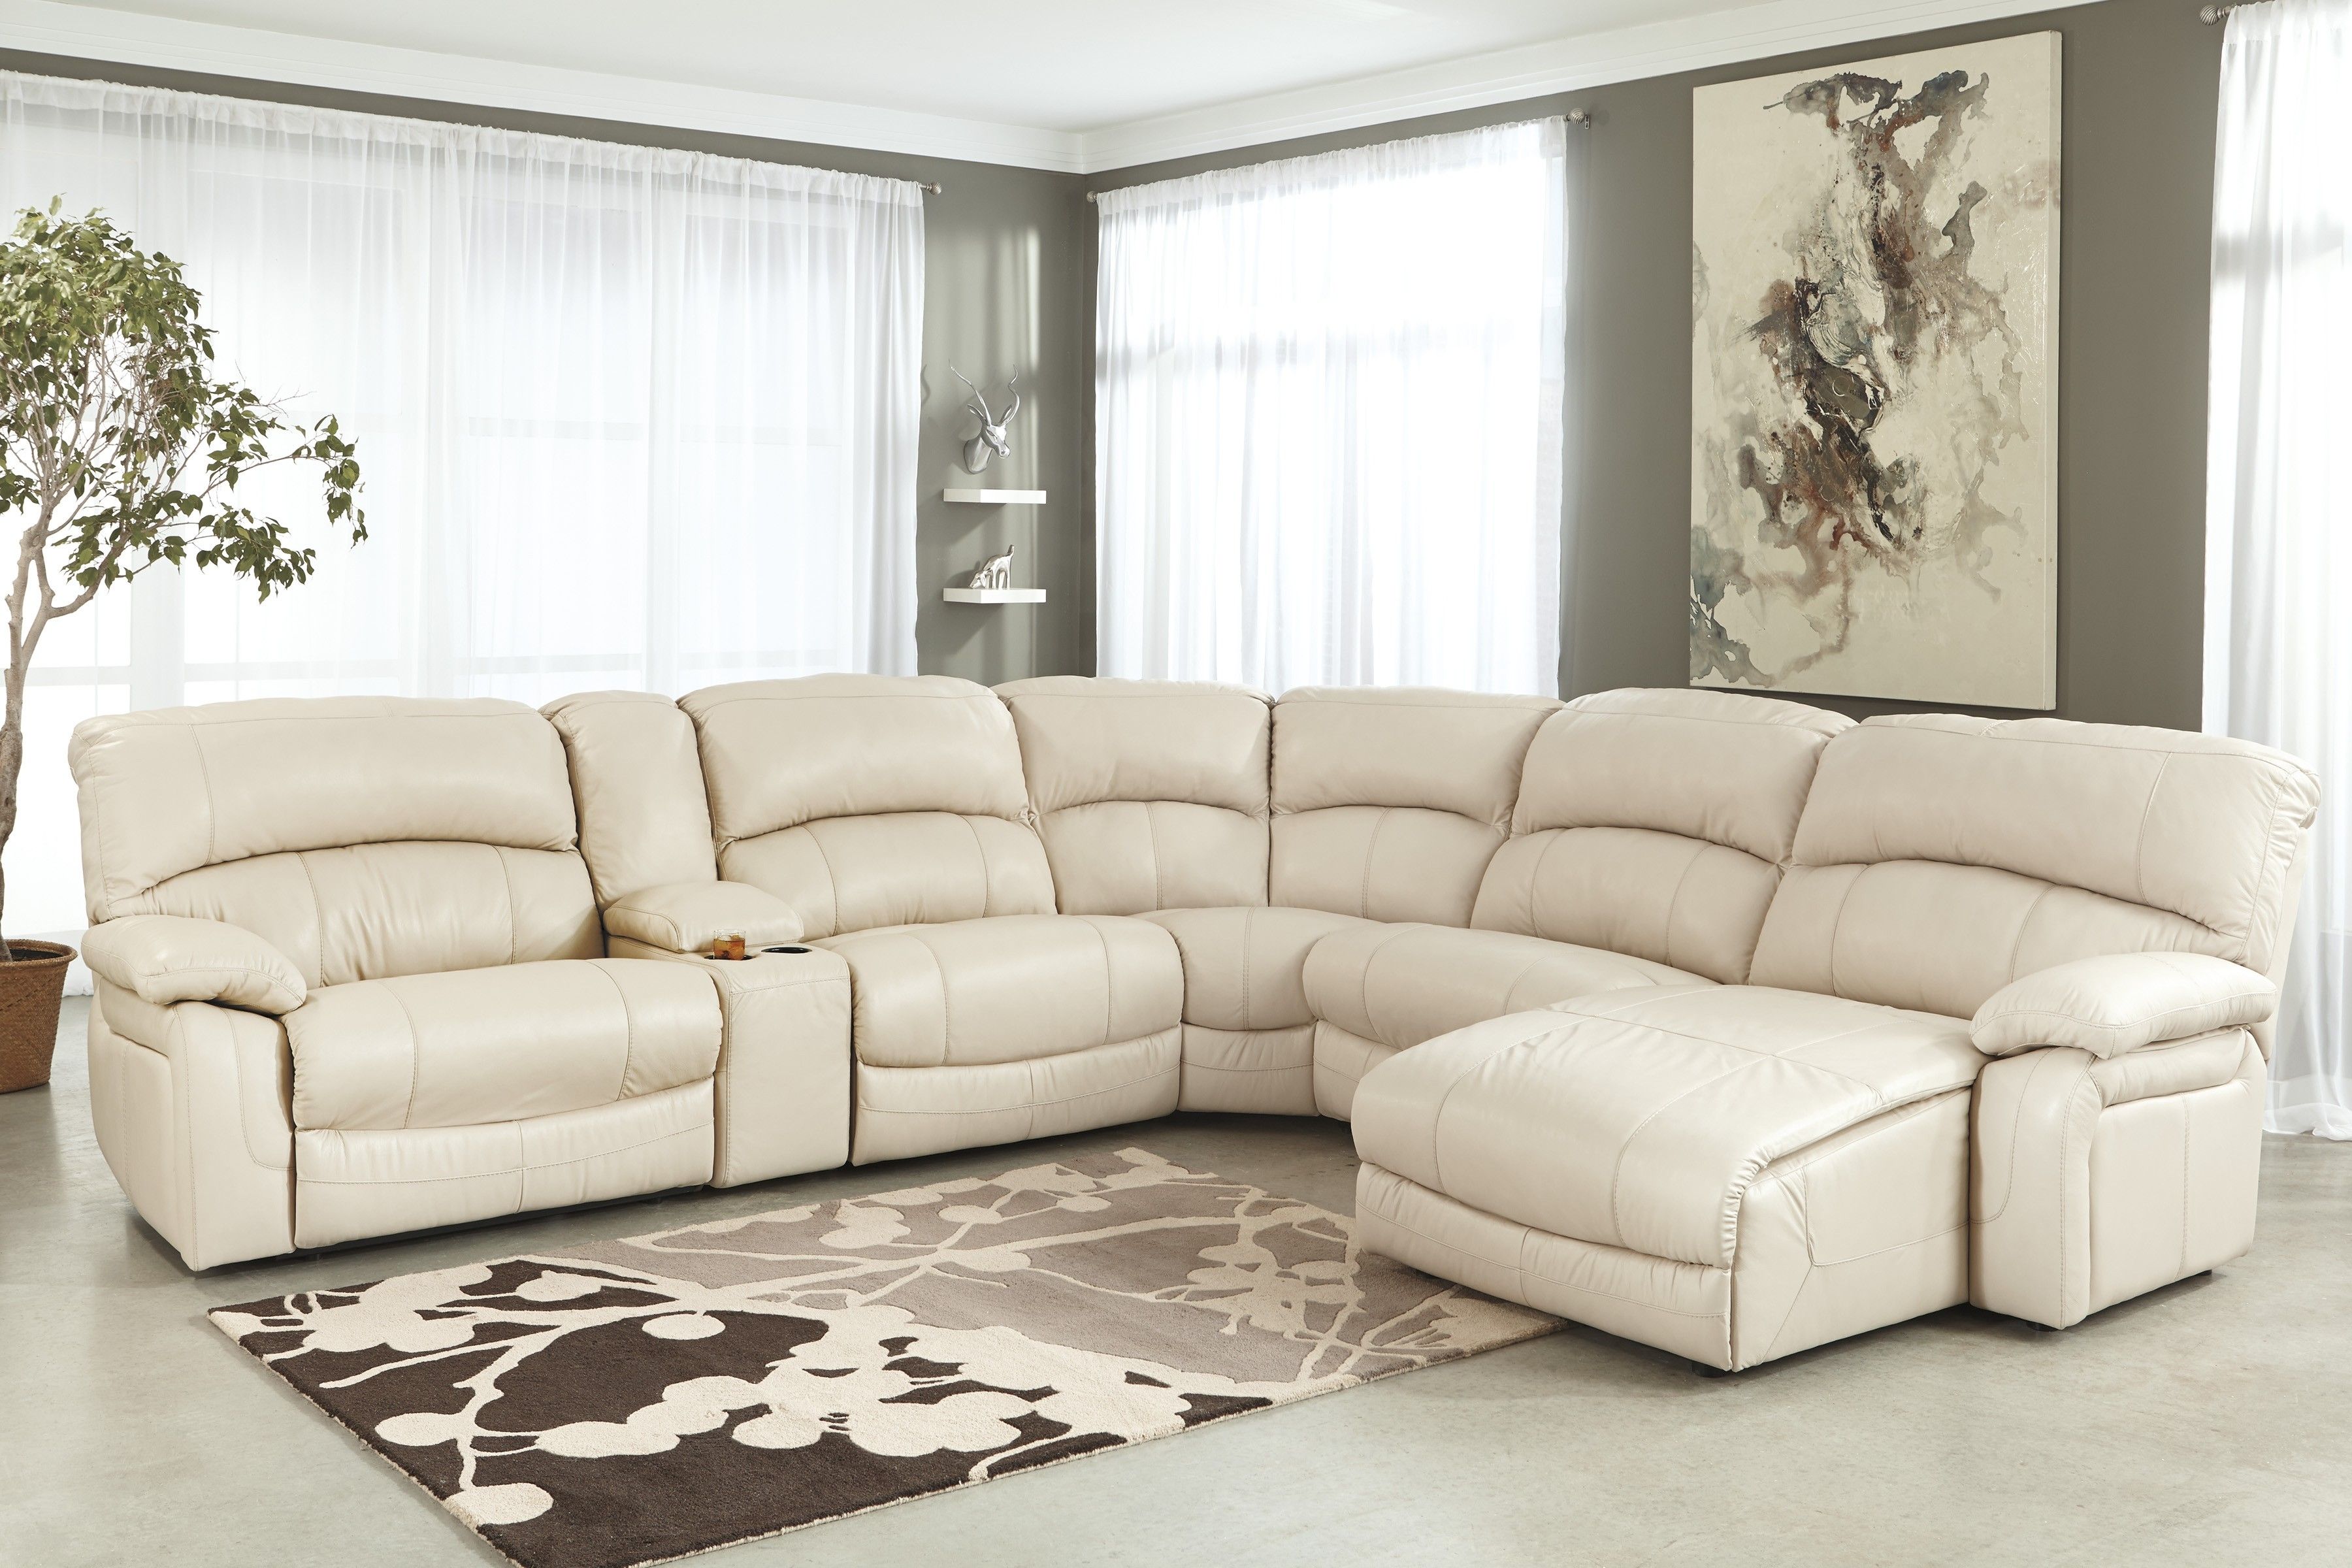 Uncategorized : Off White Leather Sectional Within Lovely Sofas For Off White Leather Sofas (Photo 6 of 10)